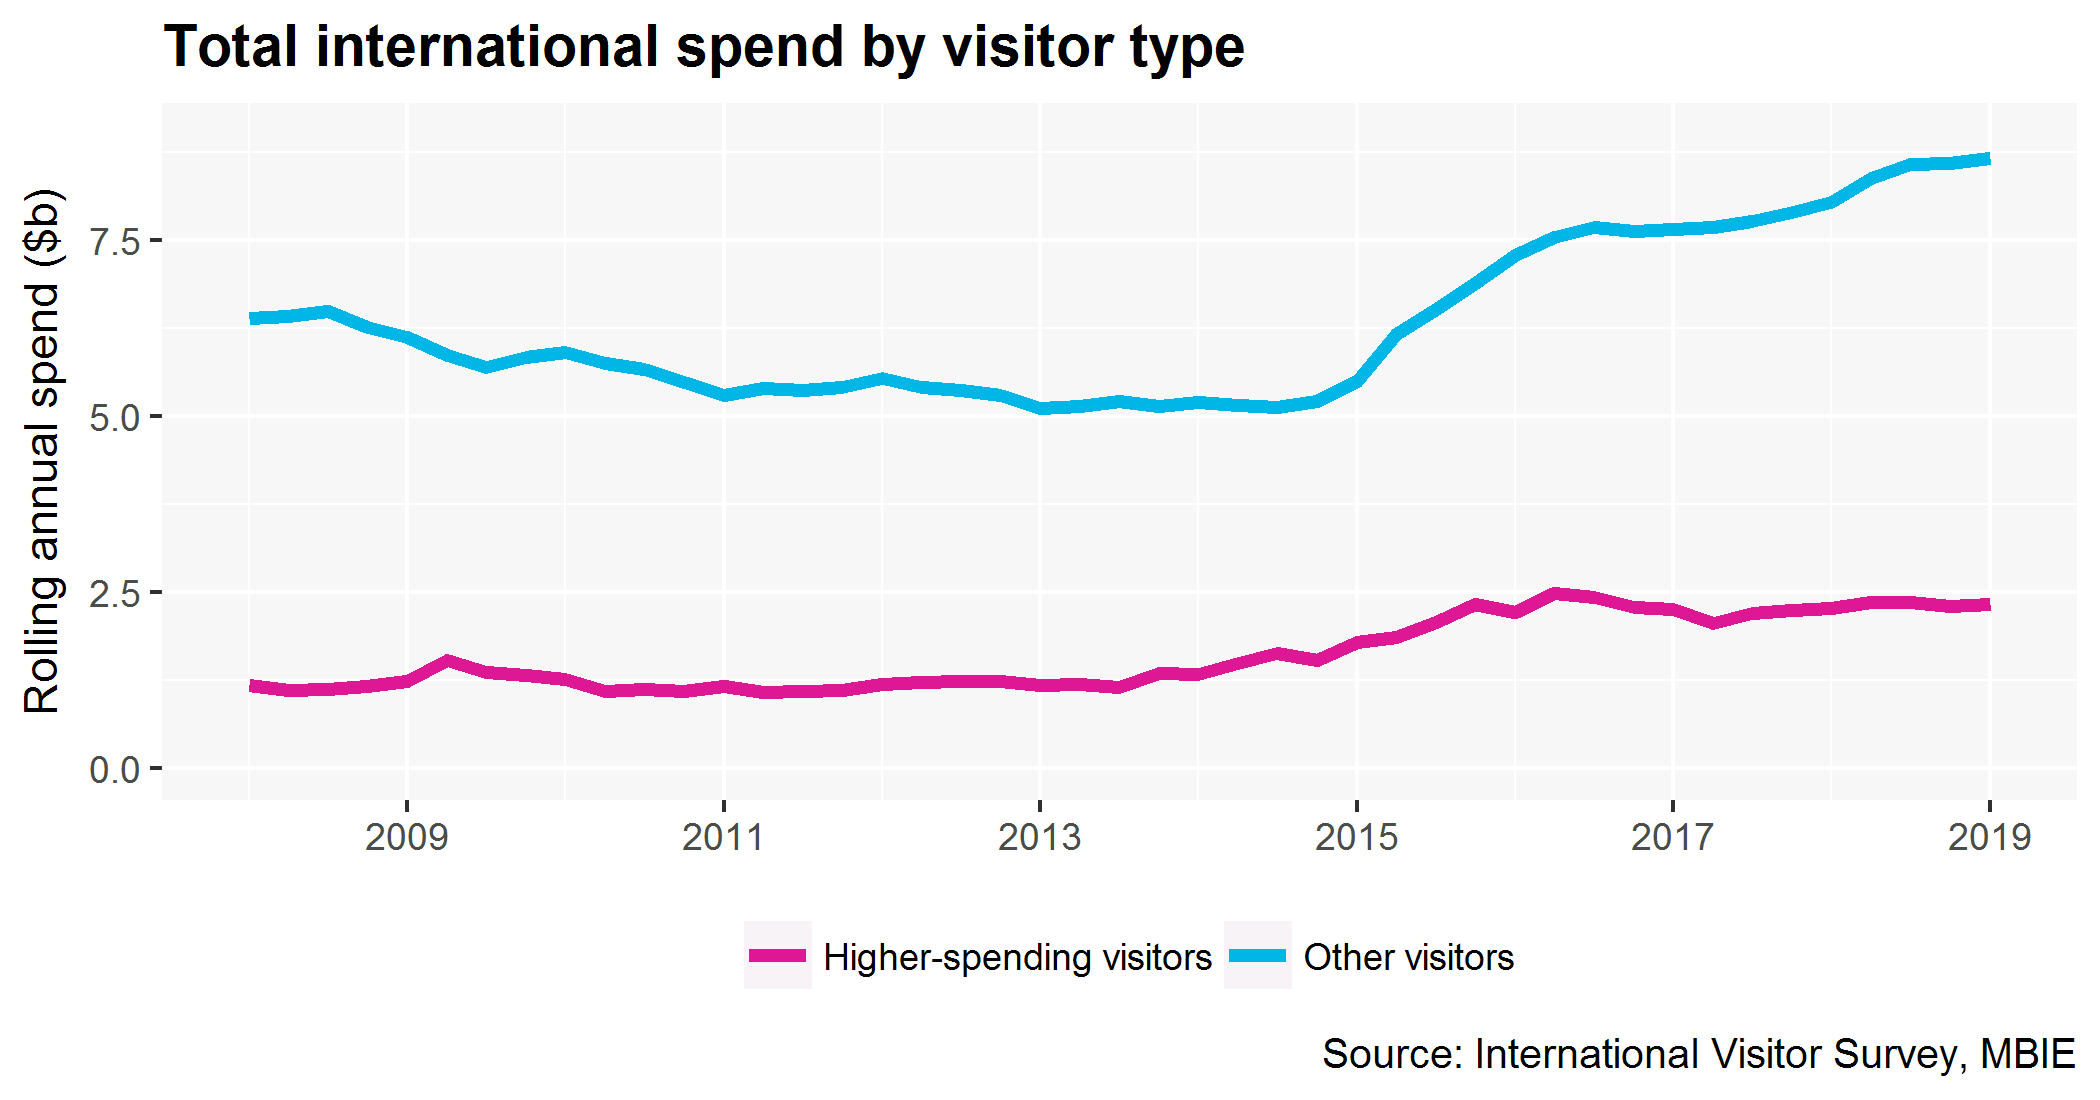 Total international spend by visitor type